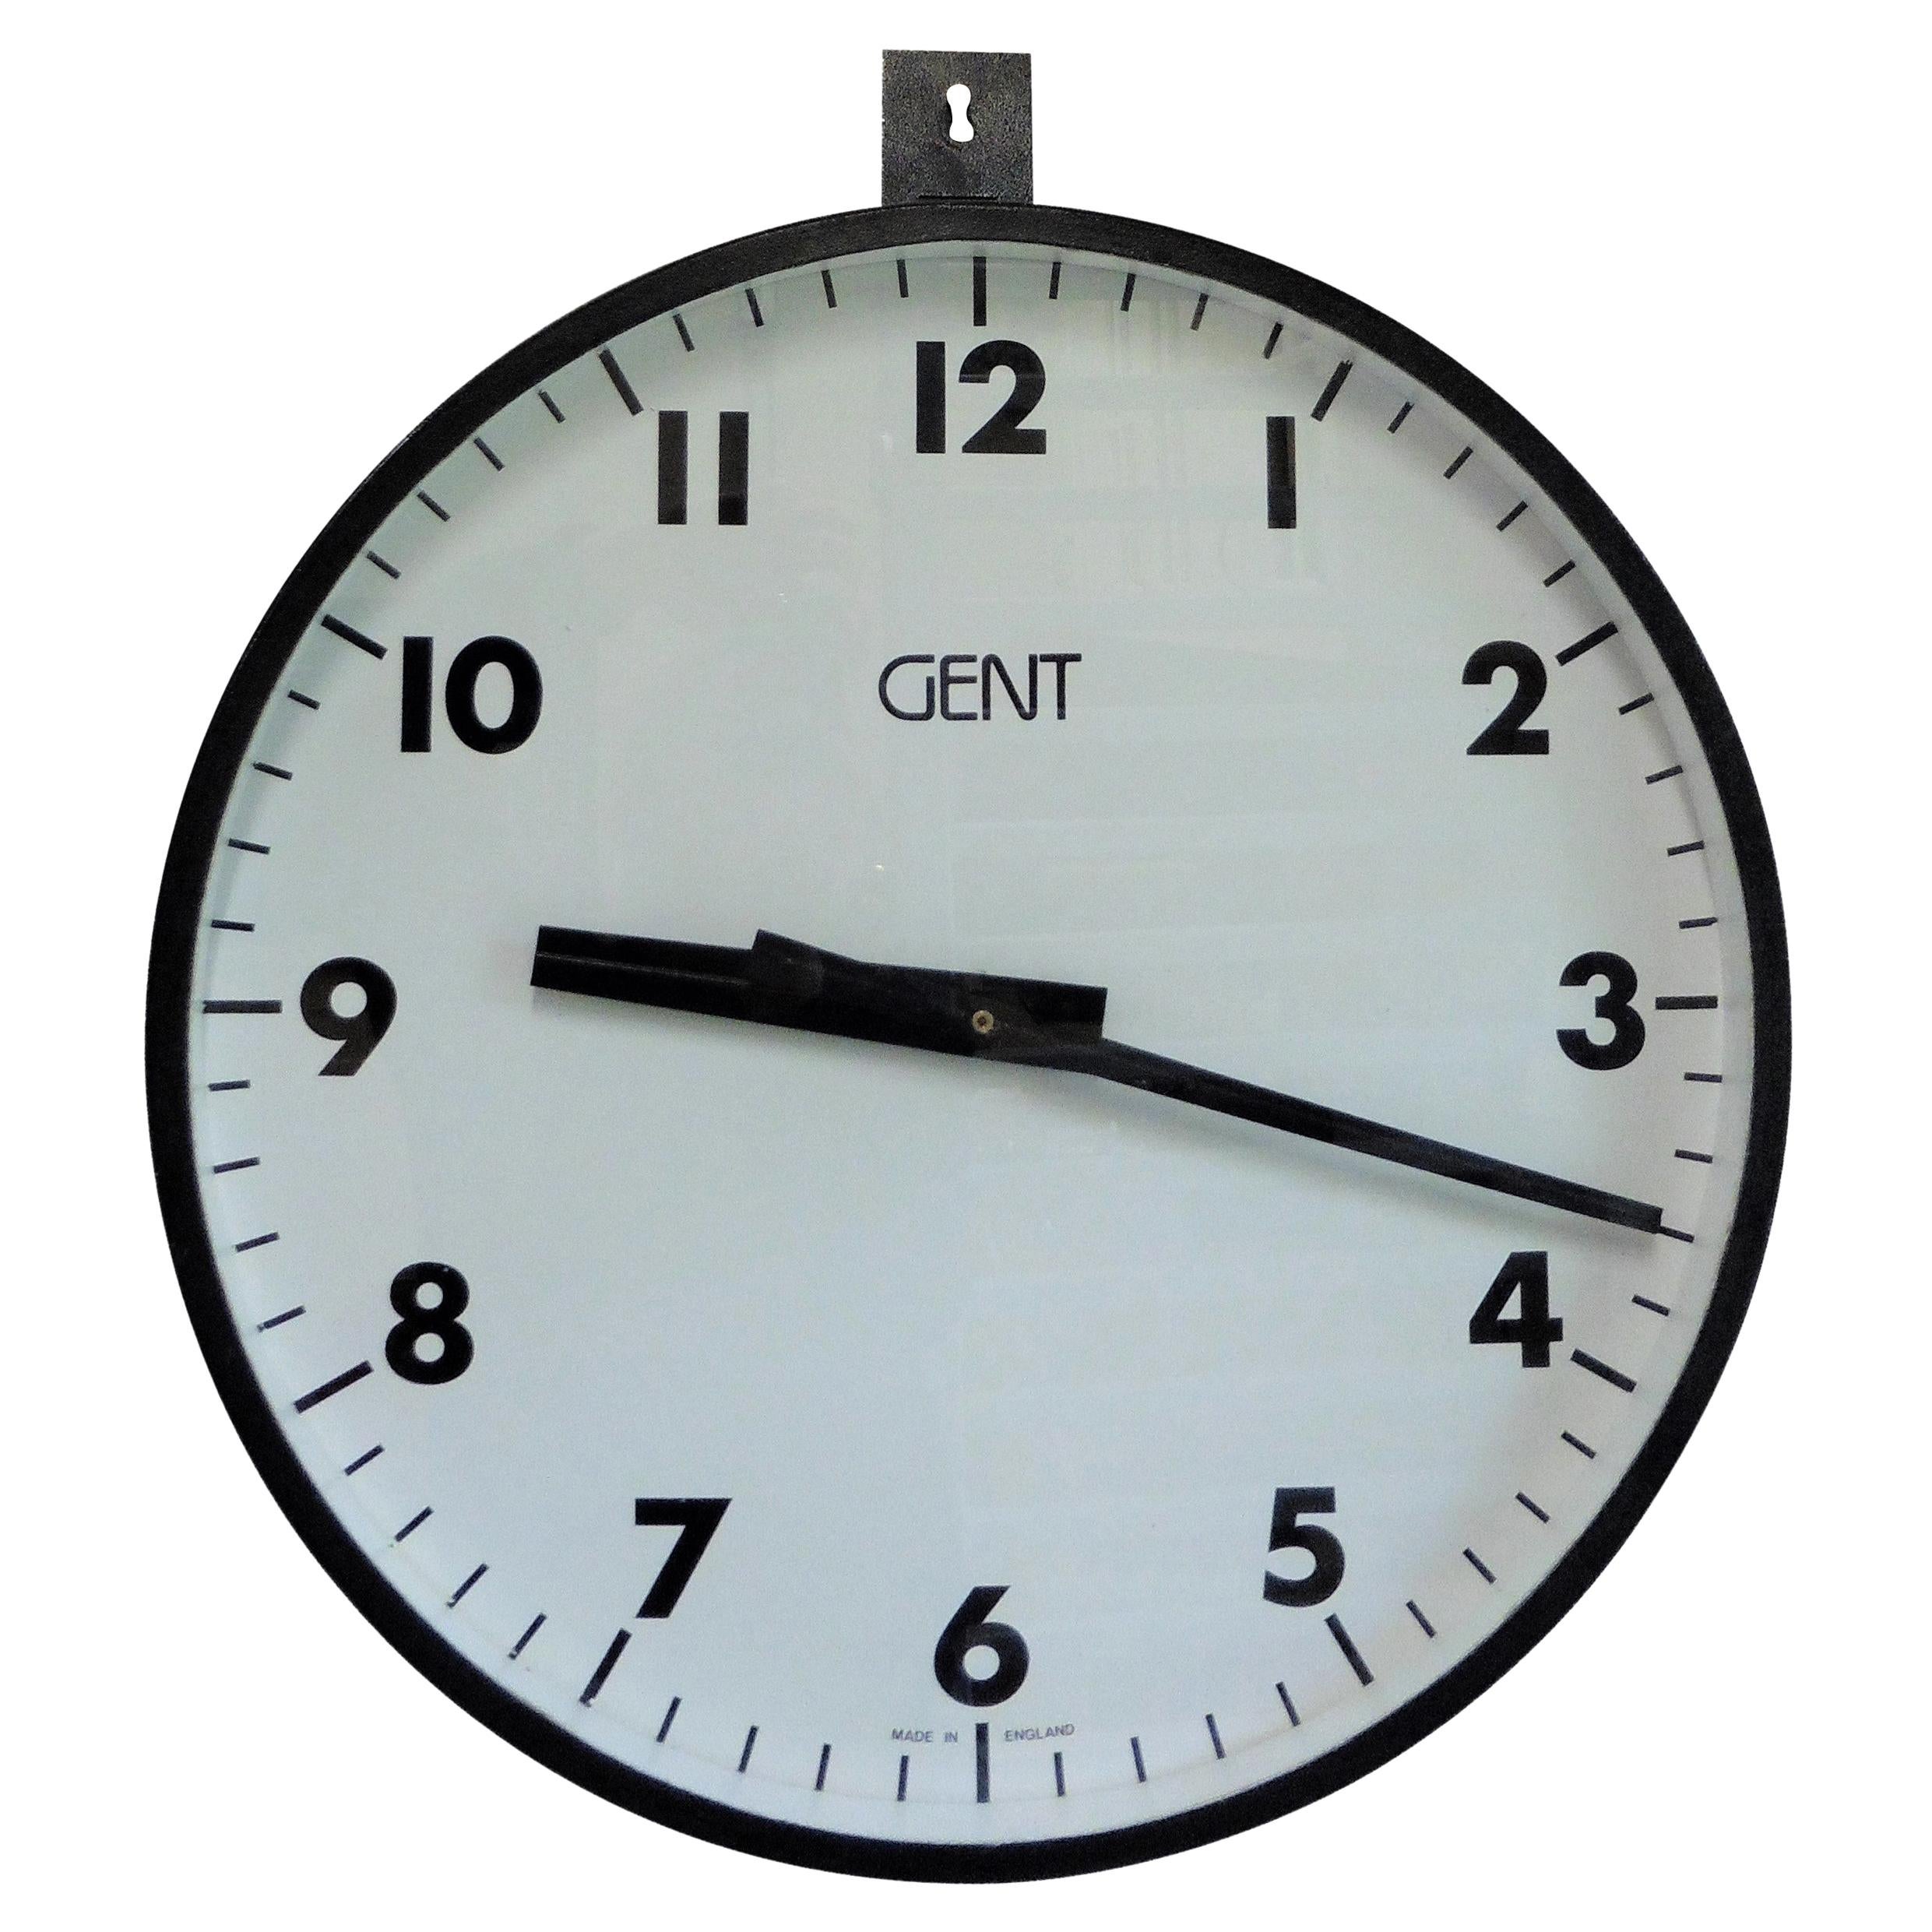 Large Round Dial Wall Clock